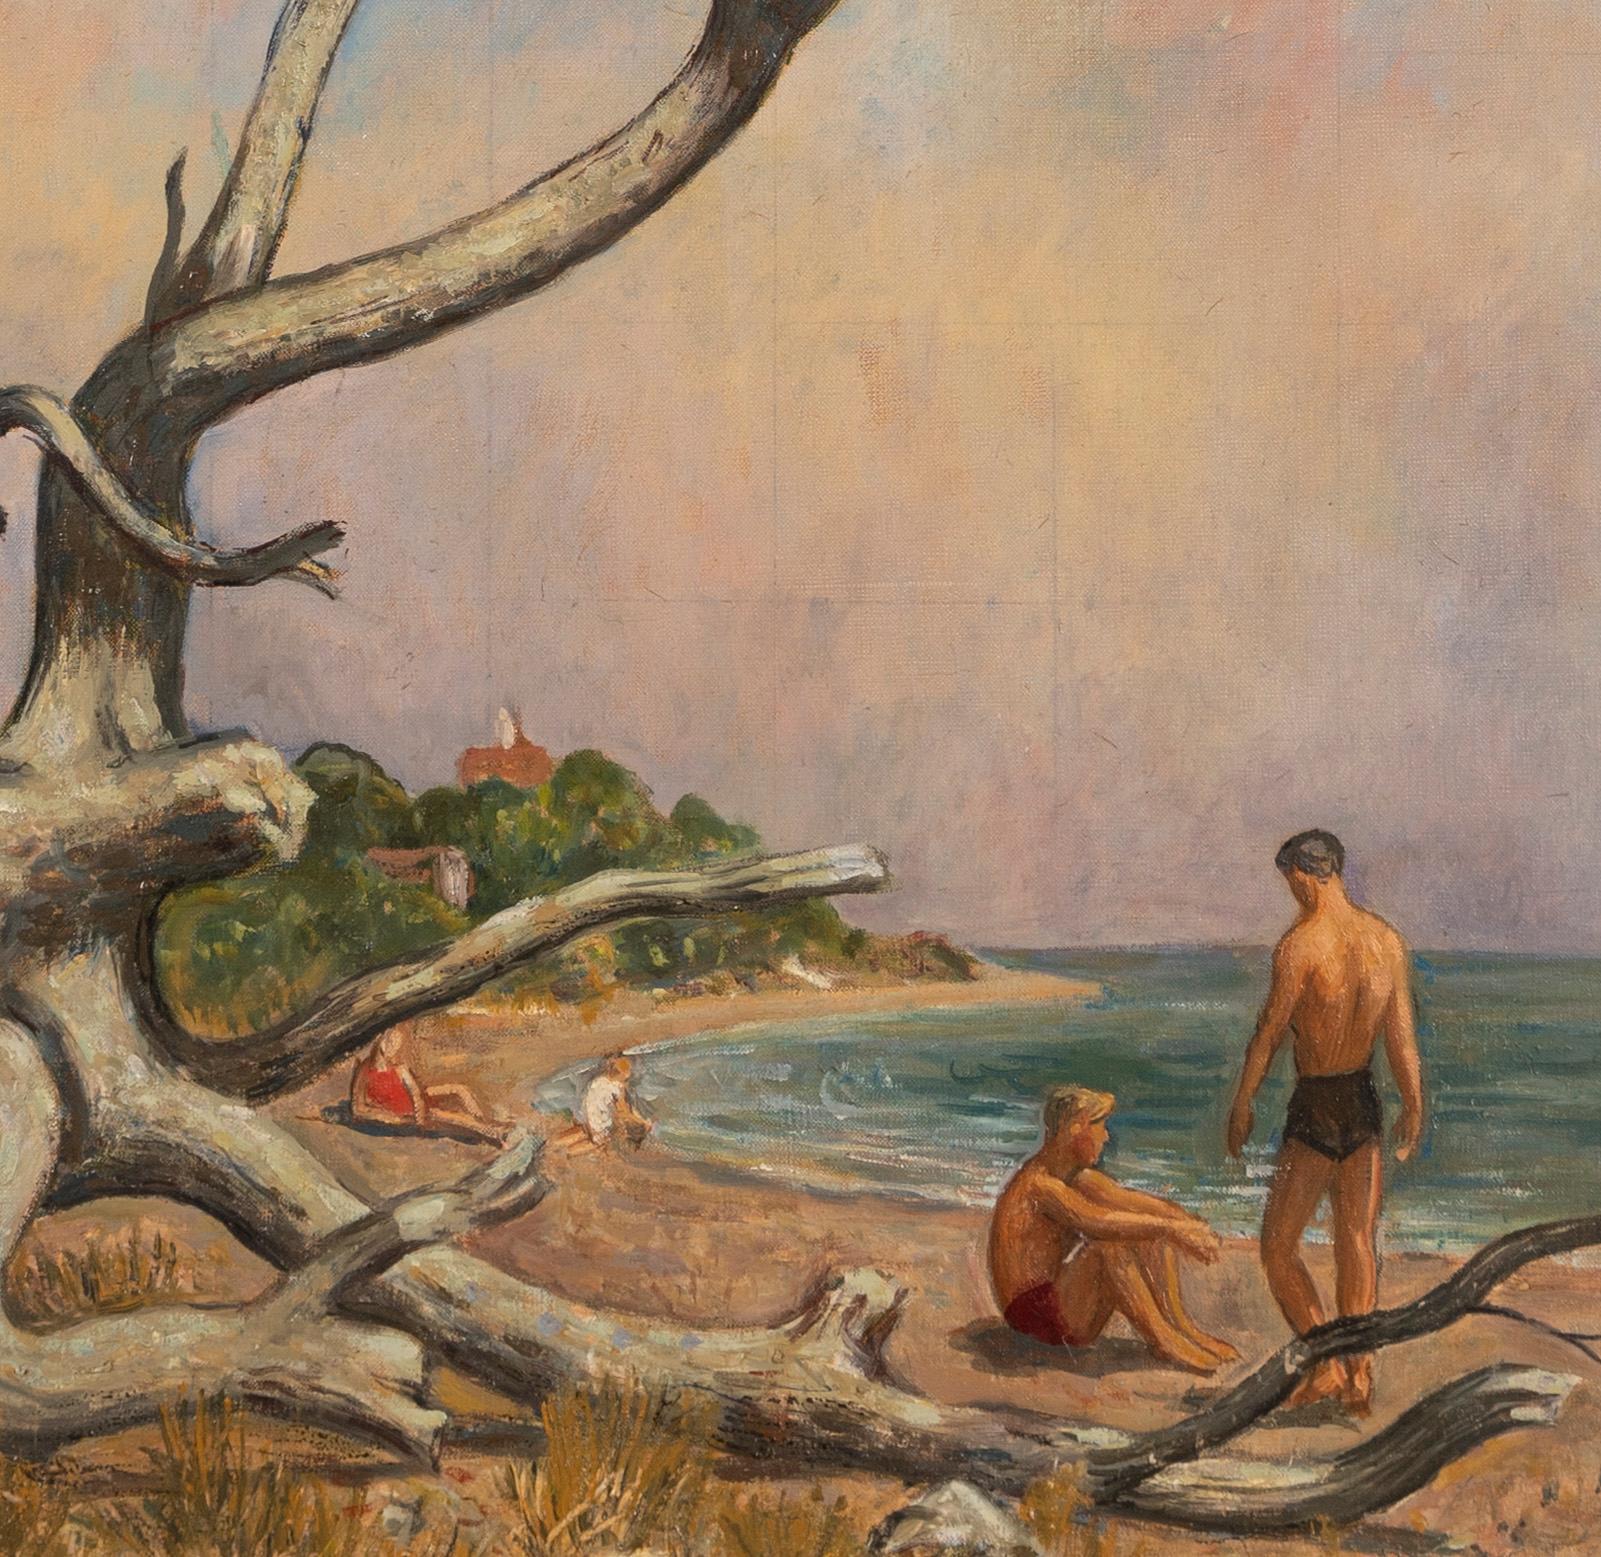 Antique American Modernist Male Beach Bather Large Signed Seascape Oil Painting  - Brown Portrait Painting by Henry Ernest Schnakenberg